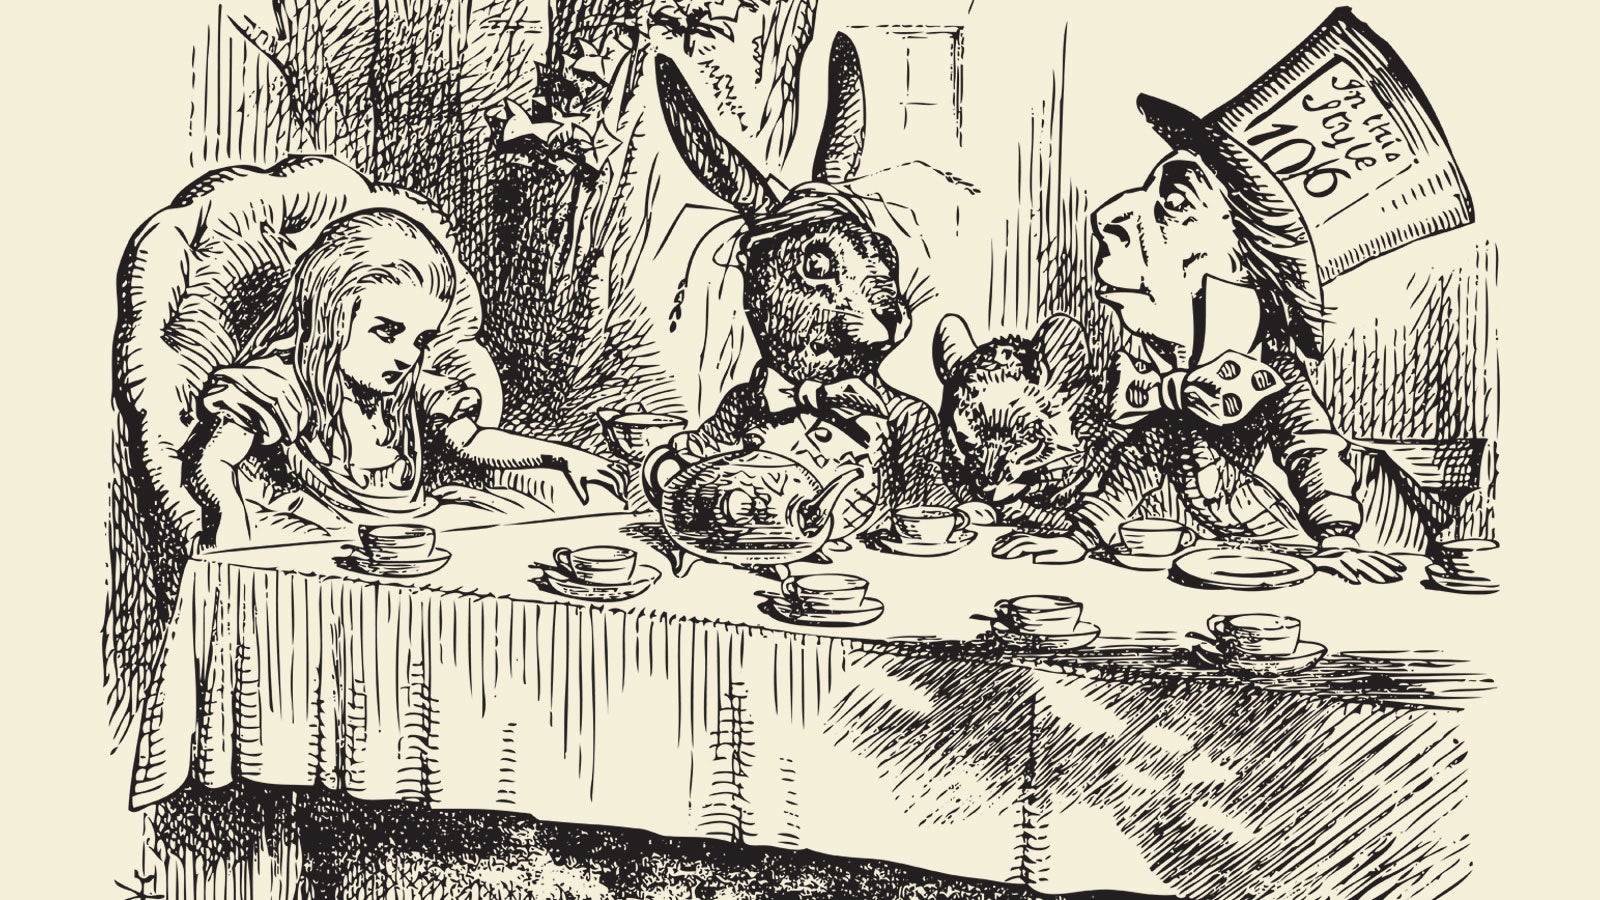 An illustration of Alice sat at the Mad Hatter's tea party with the Mad Hatter and the March Hare.